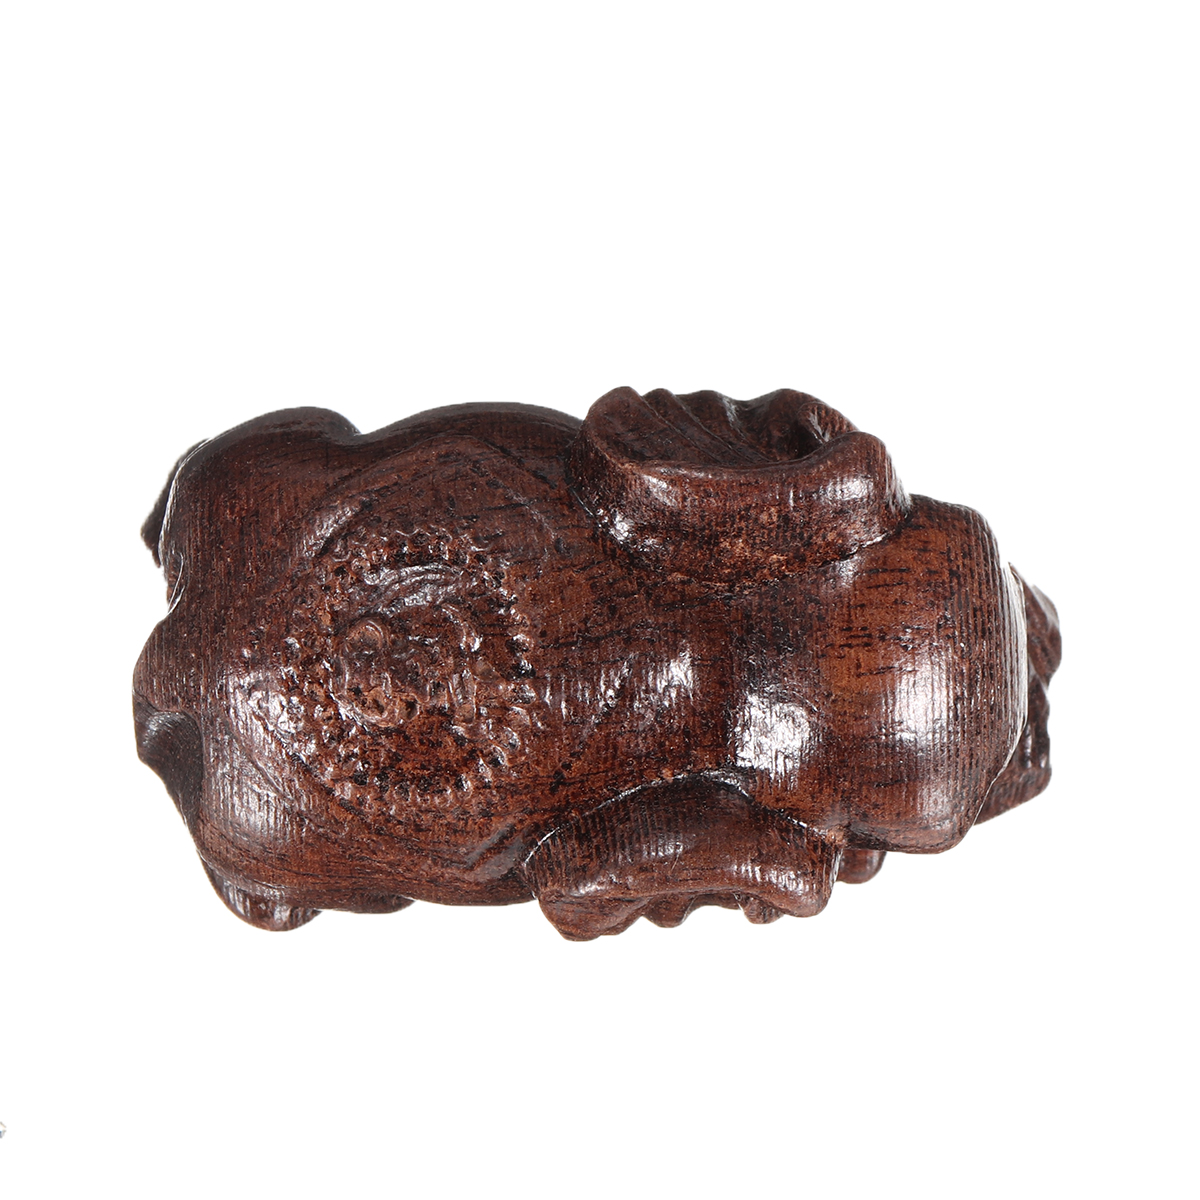 1-Pair-Natural-Agarwood-Elephant-Wood-Carving-Wood-Crafts-Retro-Decoration-Craft-Creative-Gifts-Home-1759099-5